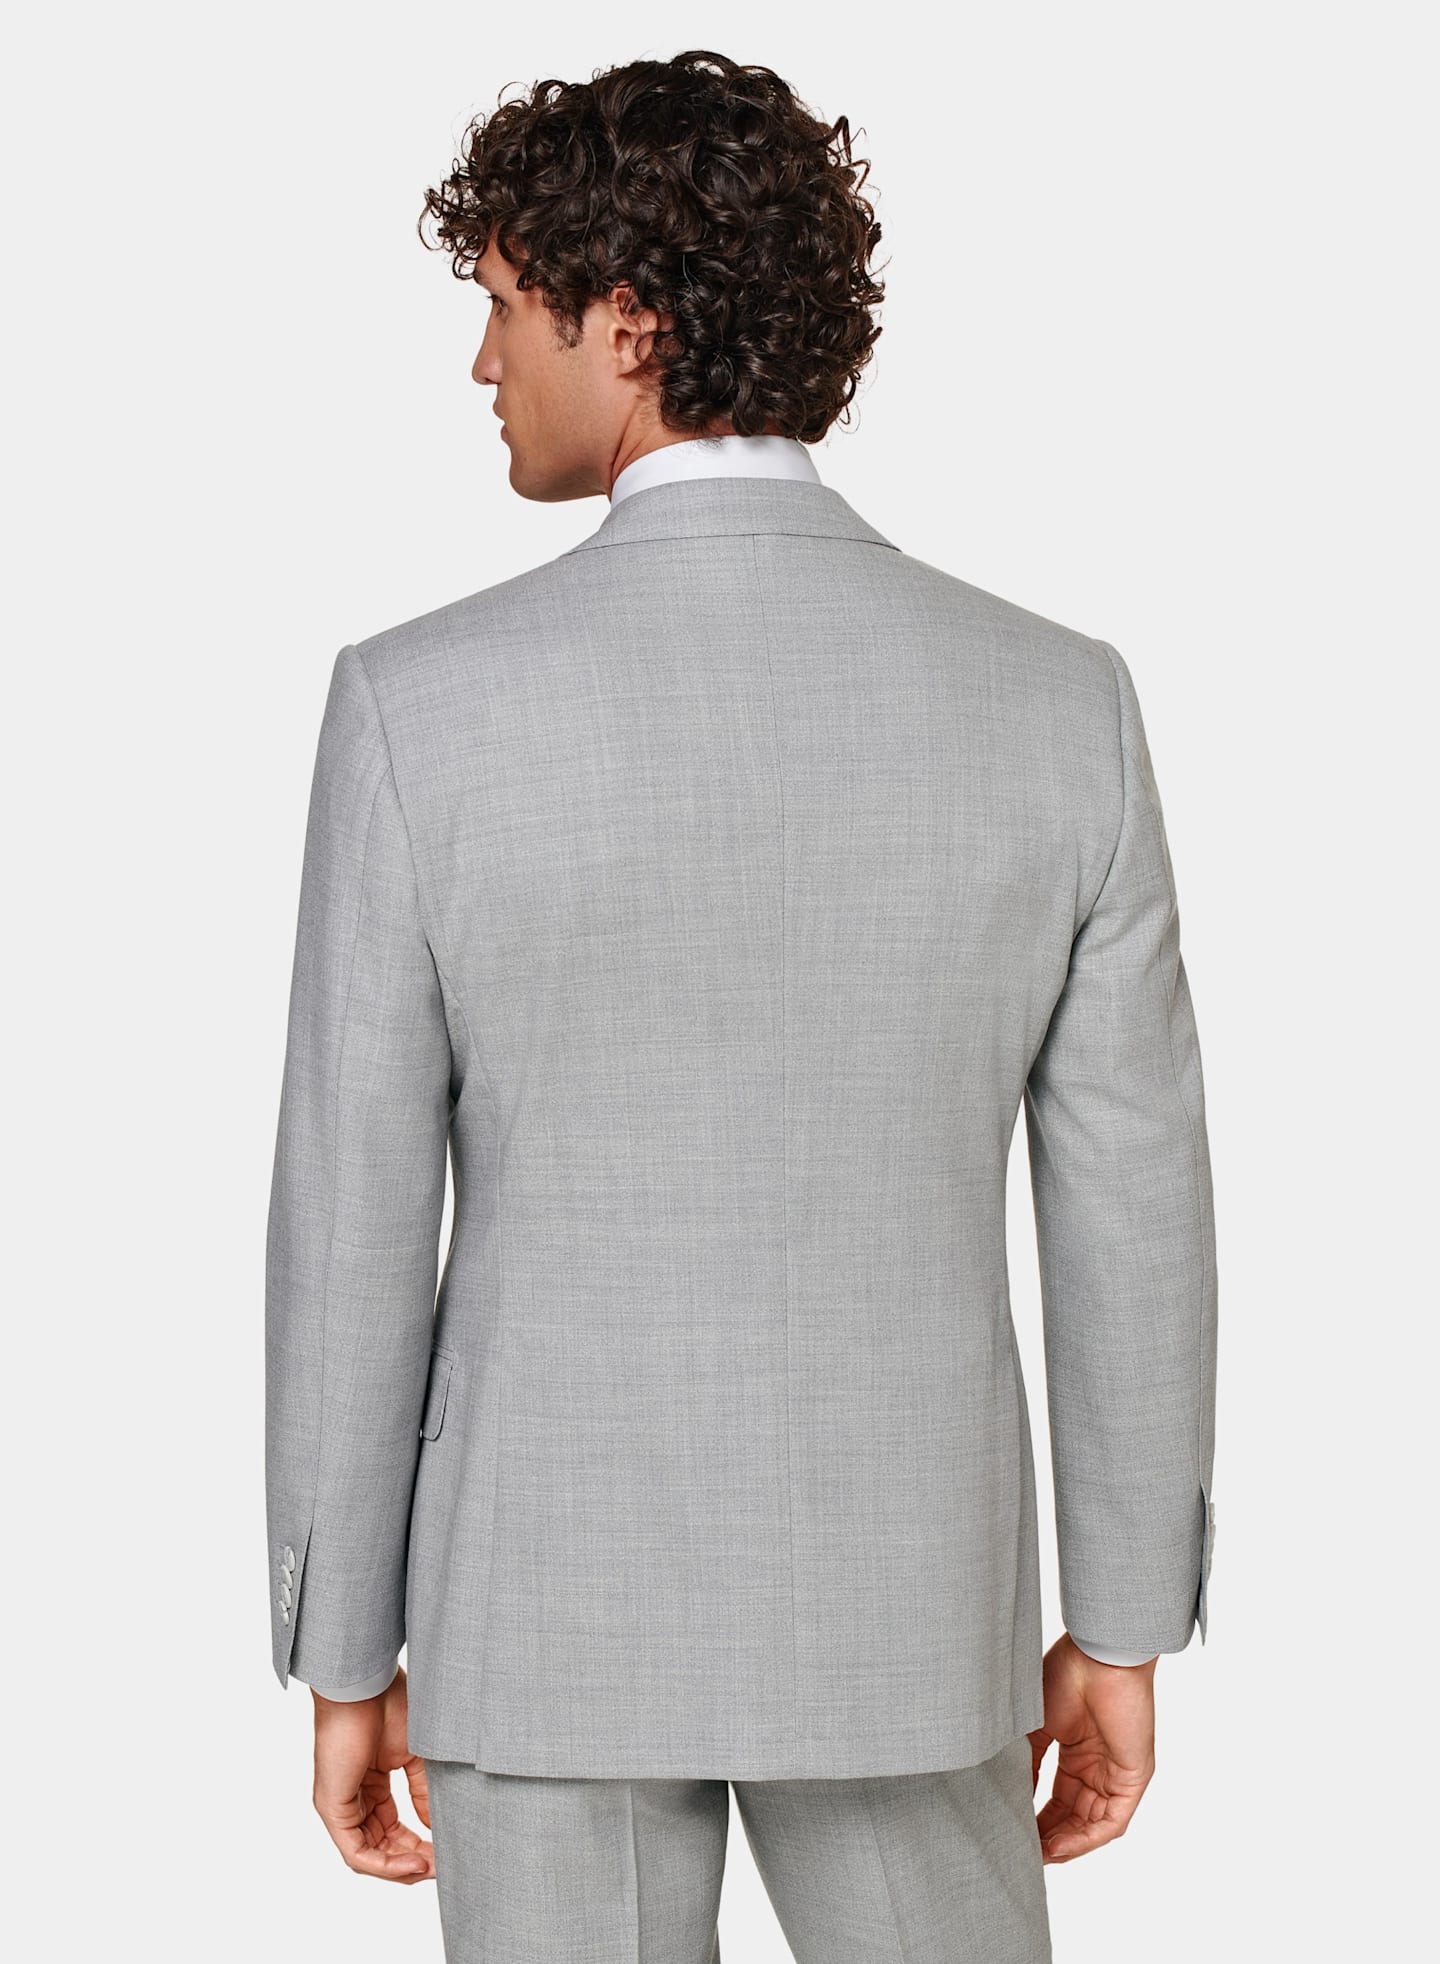 Rear view of grey regular fit suit